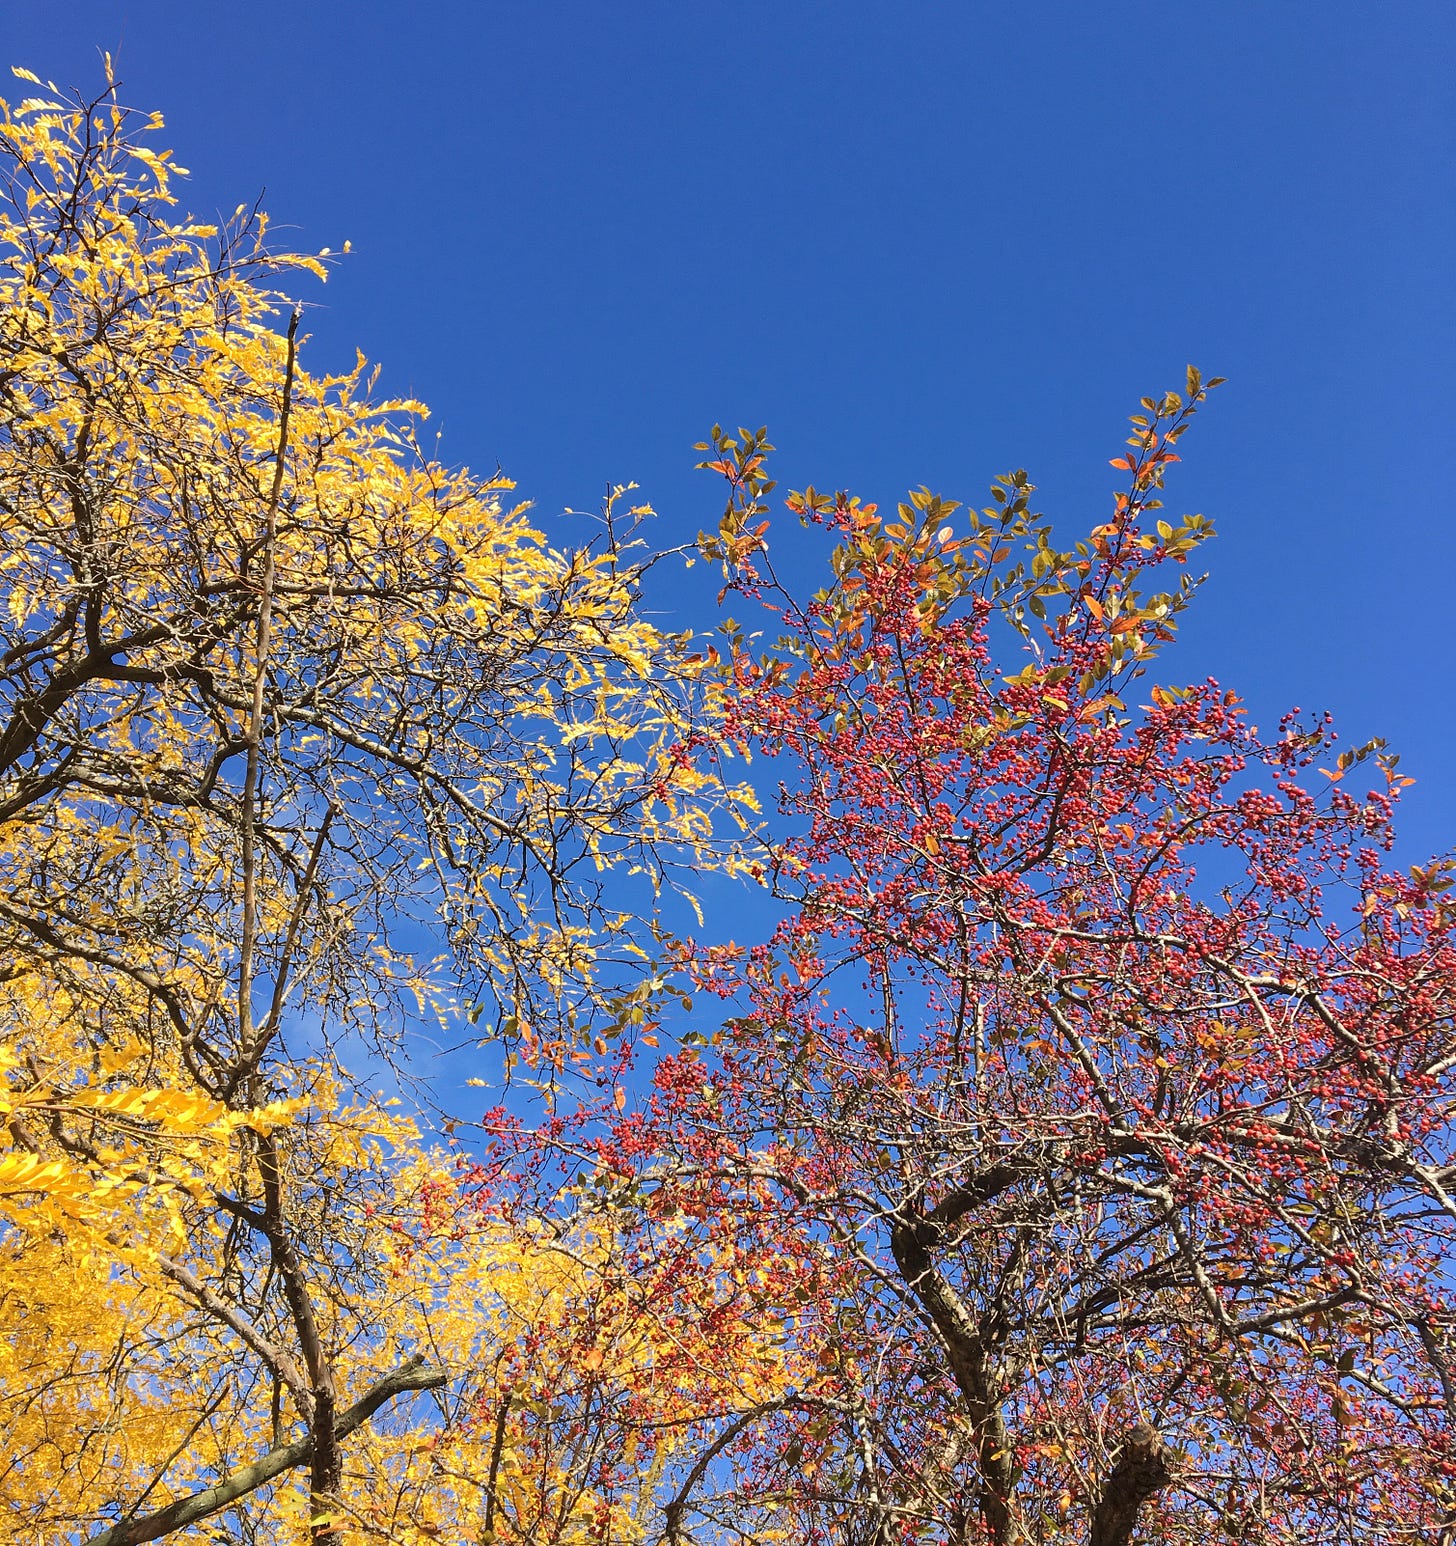 a tree with yellow leaves and another with red buds with a very blue sky in the background